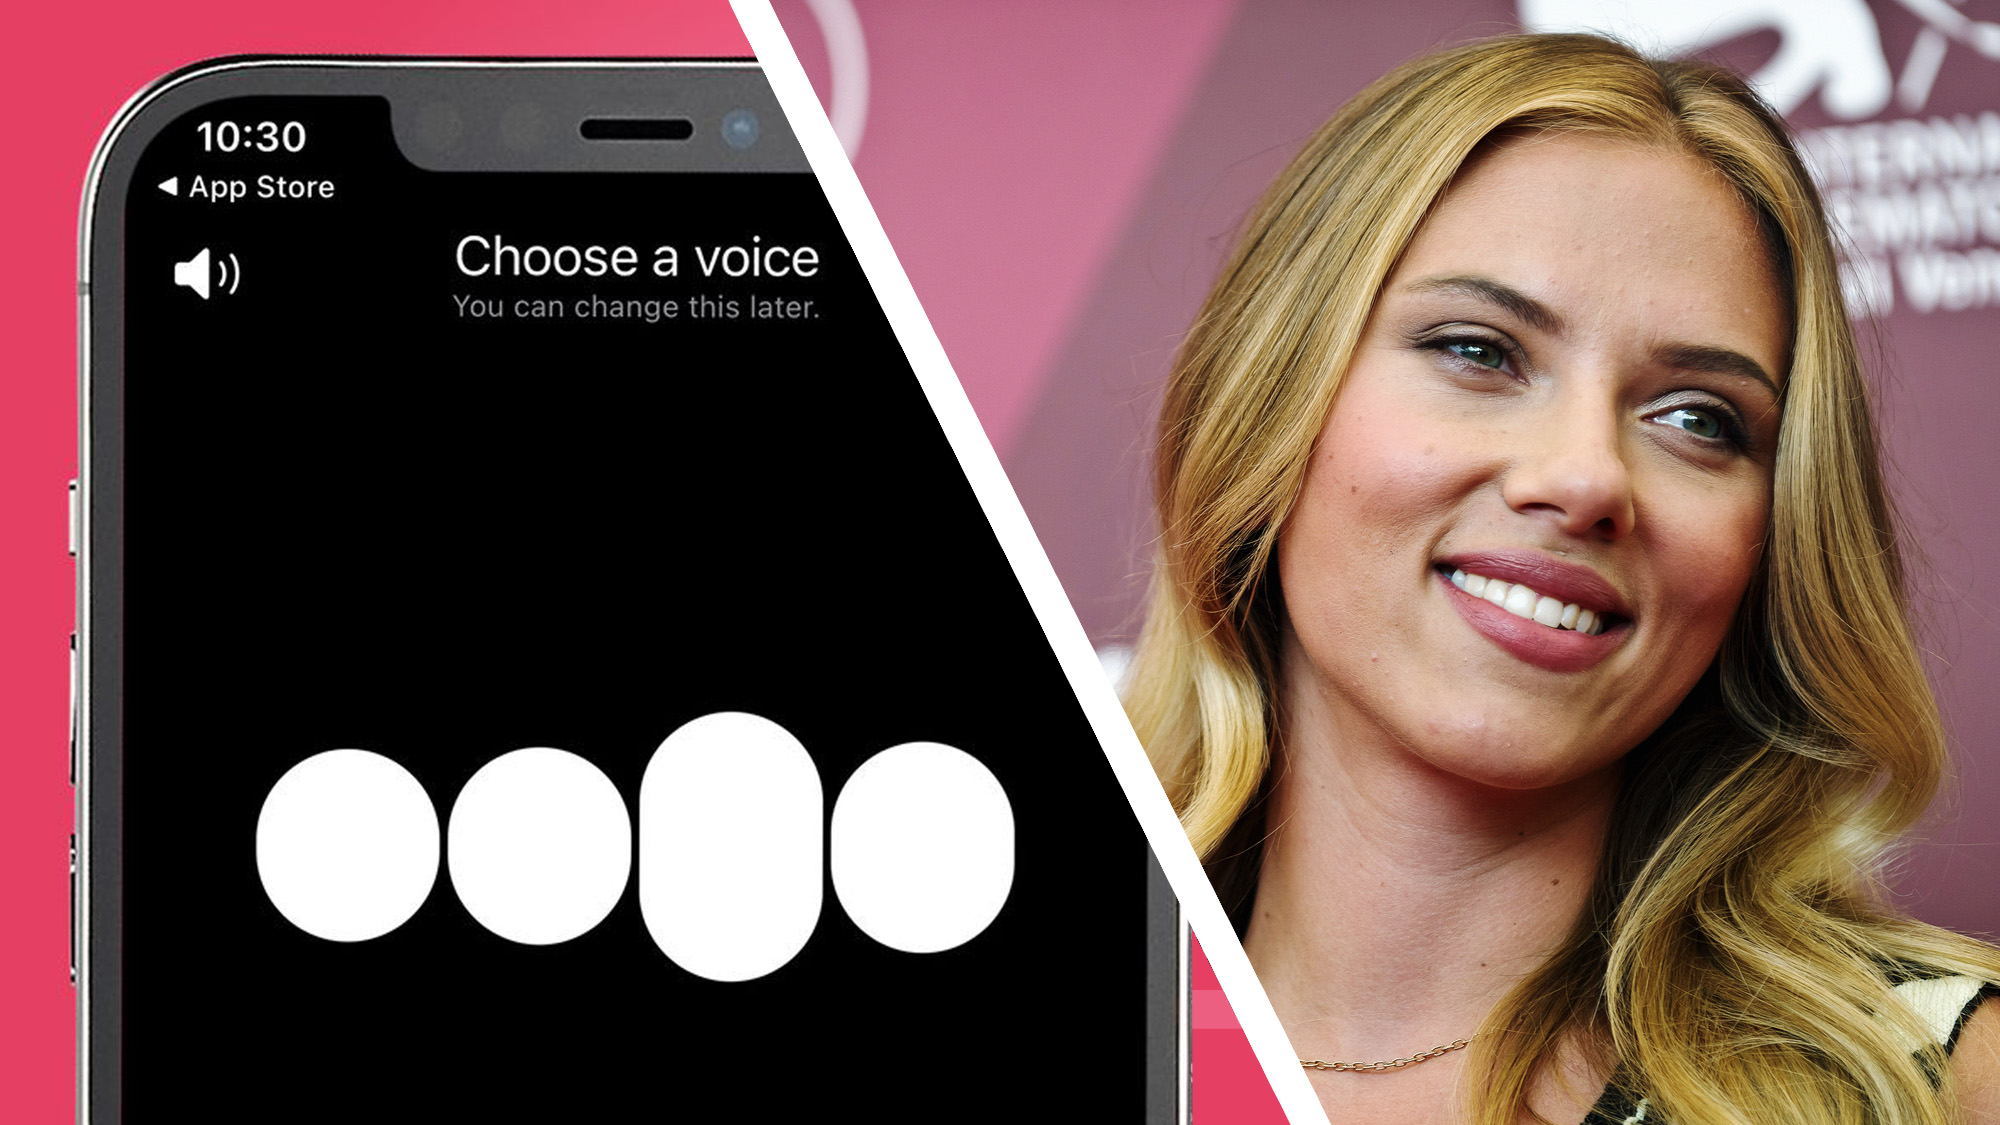 A phone with a pink background showing the ChatGPT app next to a photo of Scarlett Johansson